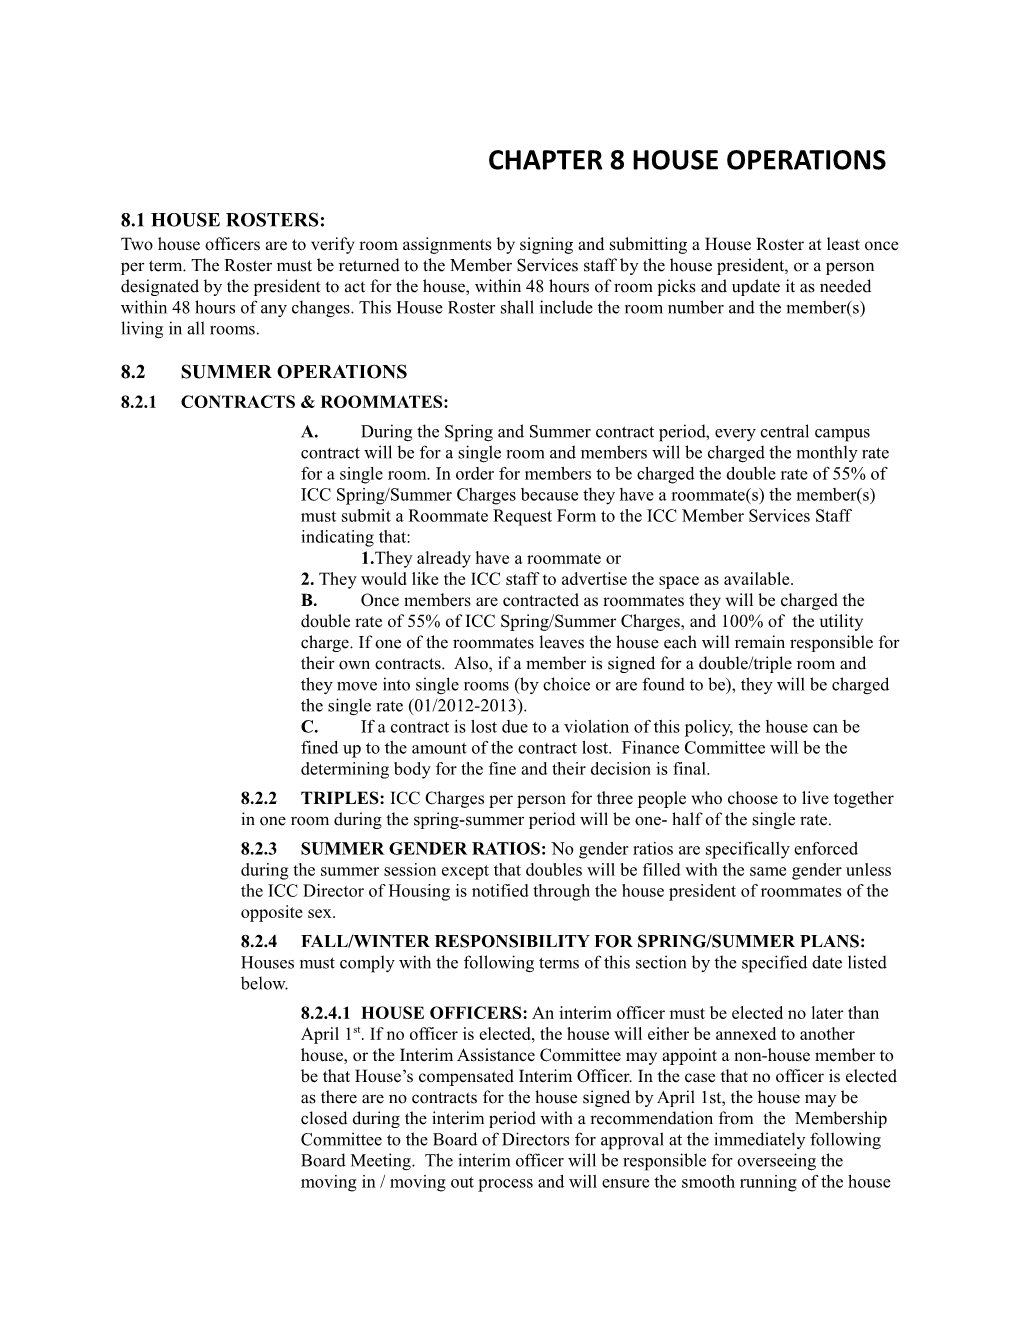 CHAPTER 1: House Operations